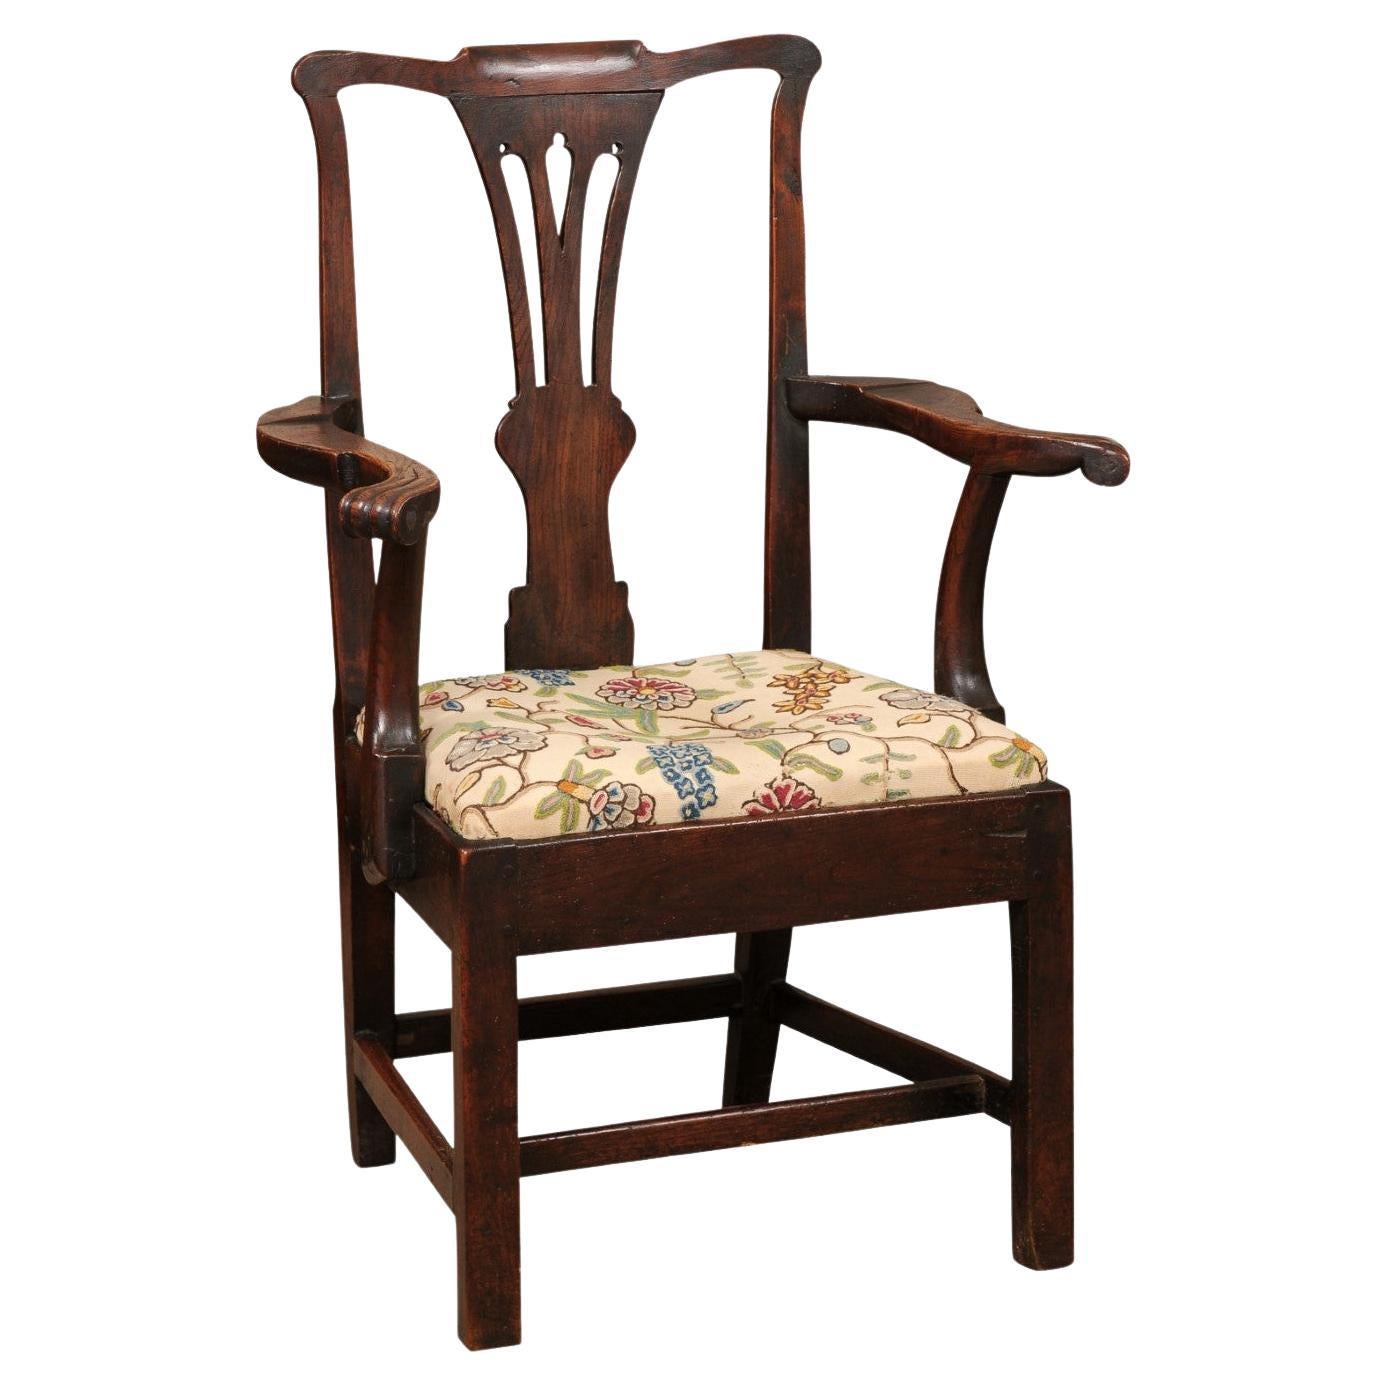 Large 18th Century English George III Armchair in Elm with Crewel Work Slip Seat For Sale